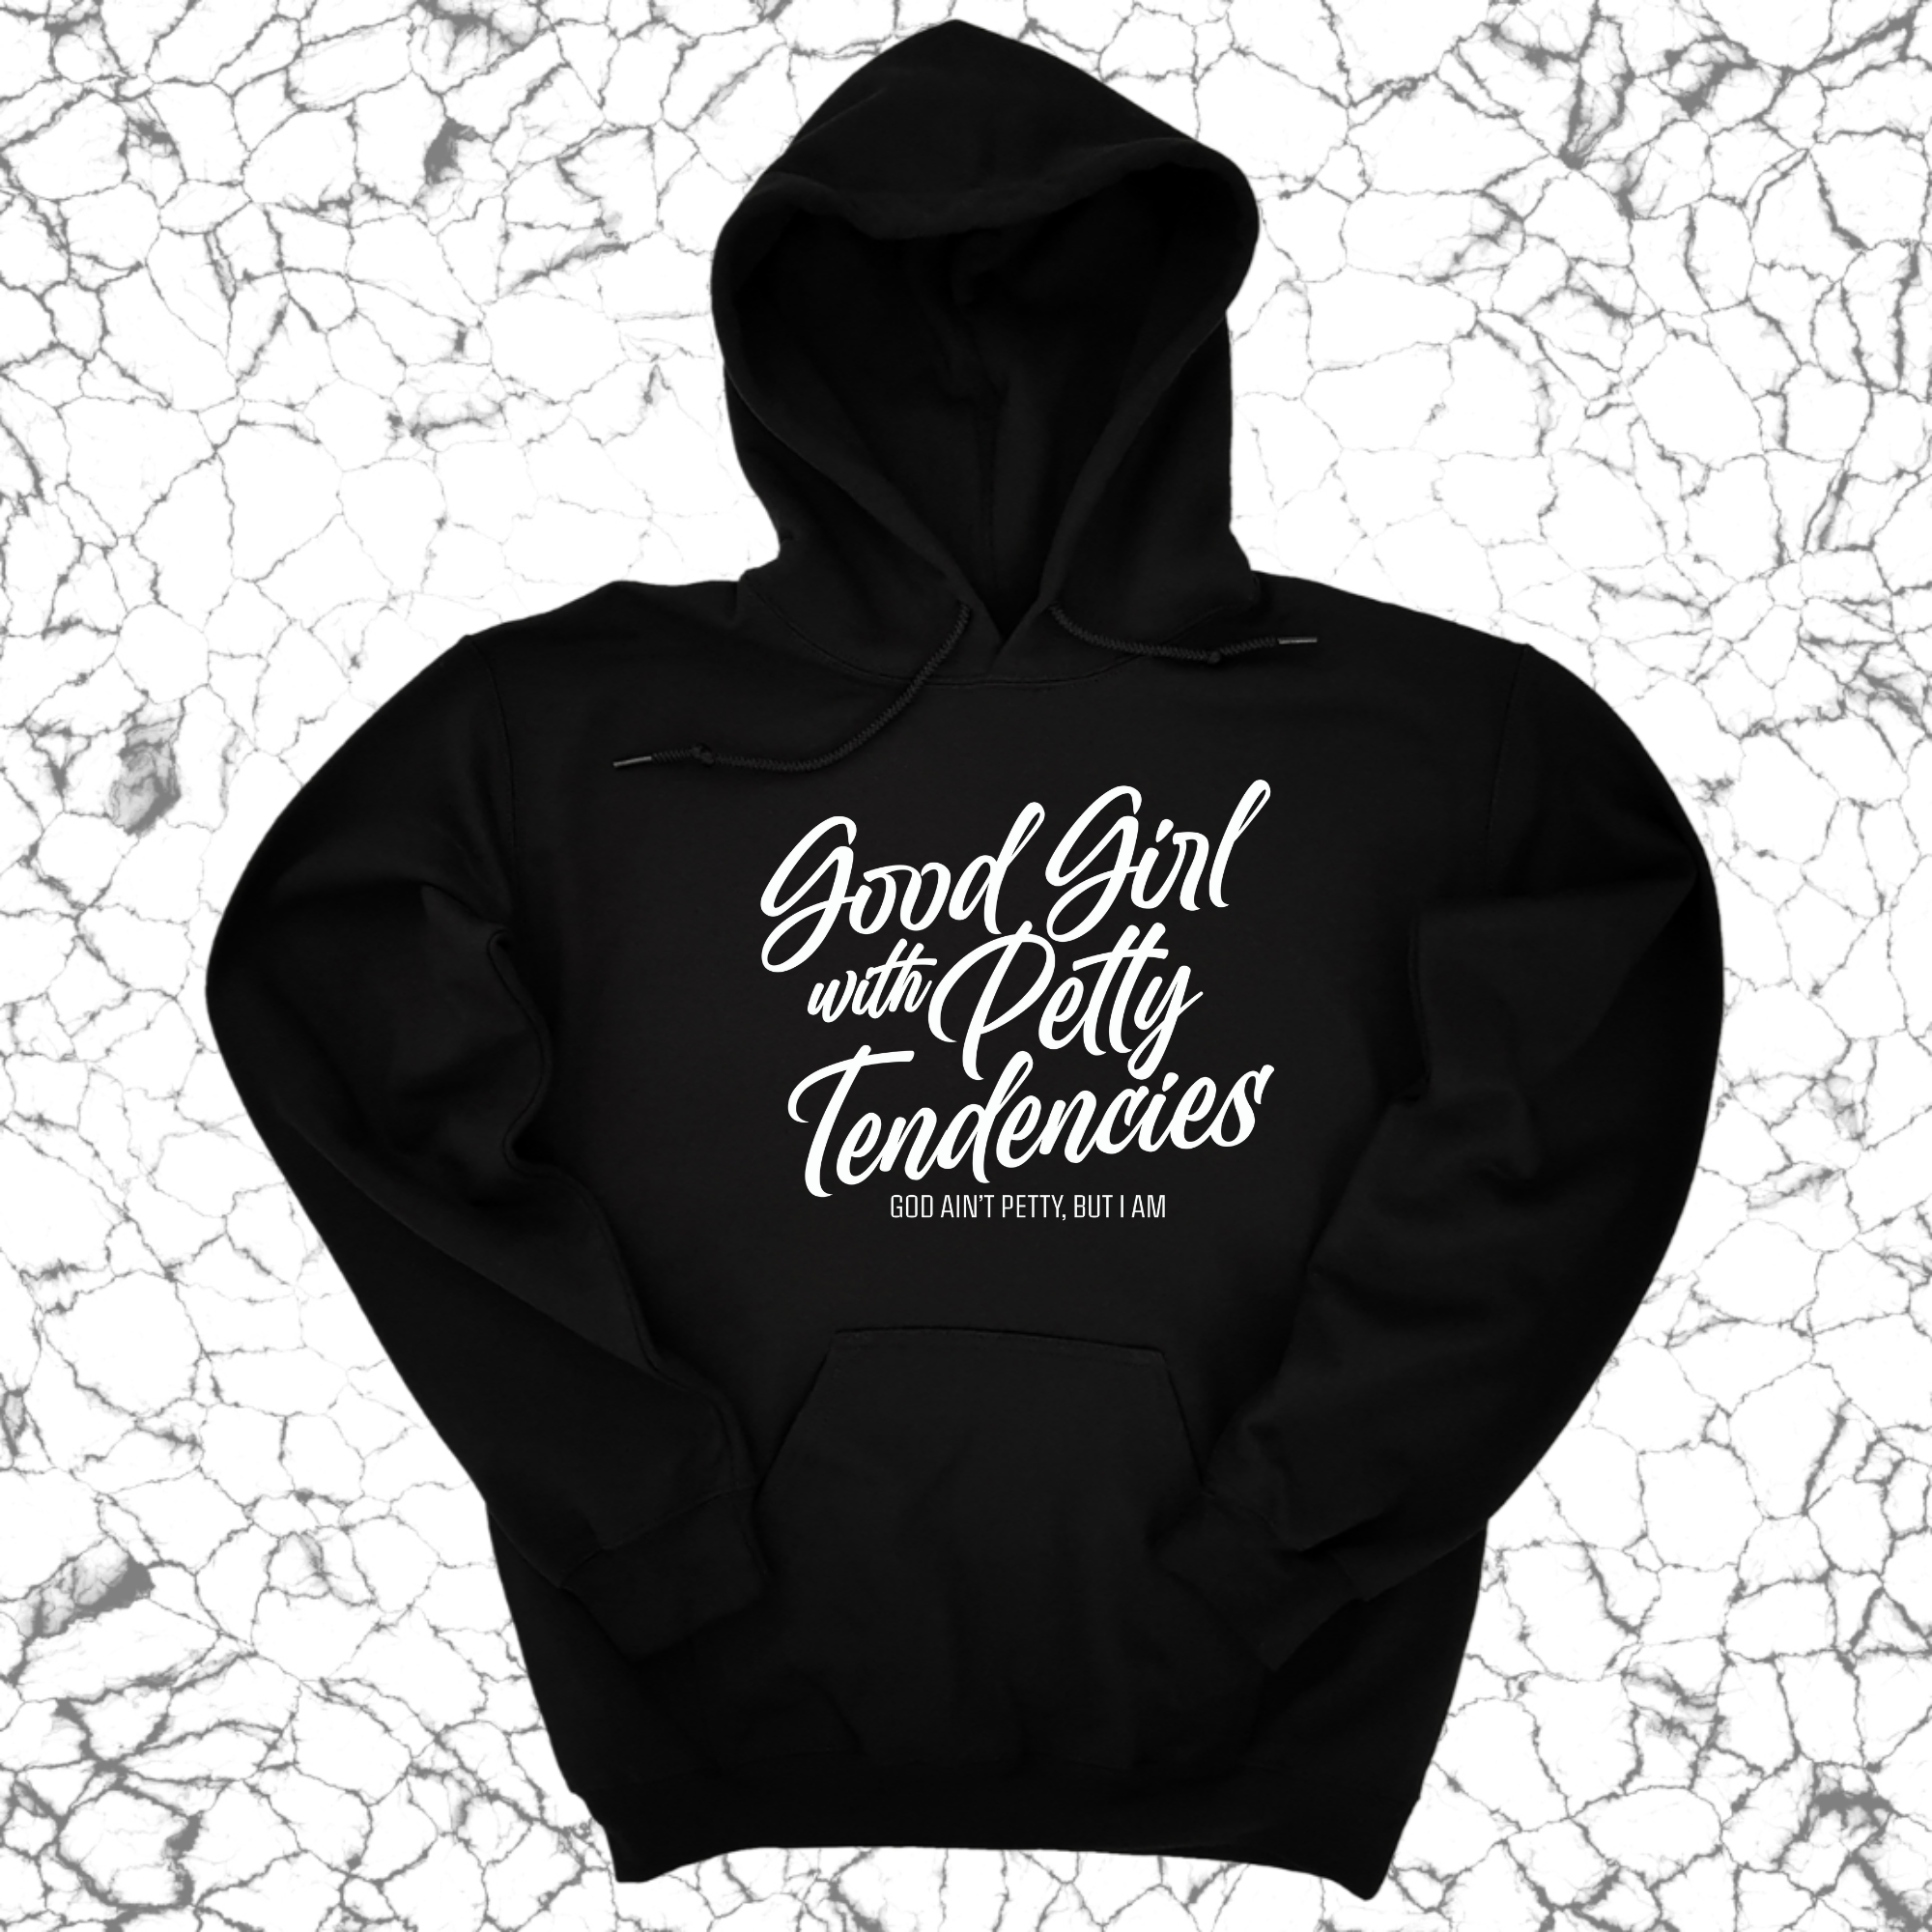 IMPERFECT -GOOD GIRL WITH PETTY TENDENCIES HOODIE BLACK/WHITE 4XL-The Original God Ain't Petty But I Am